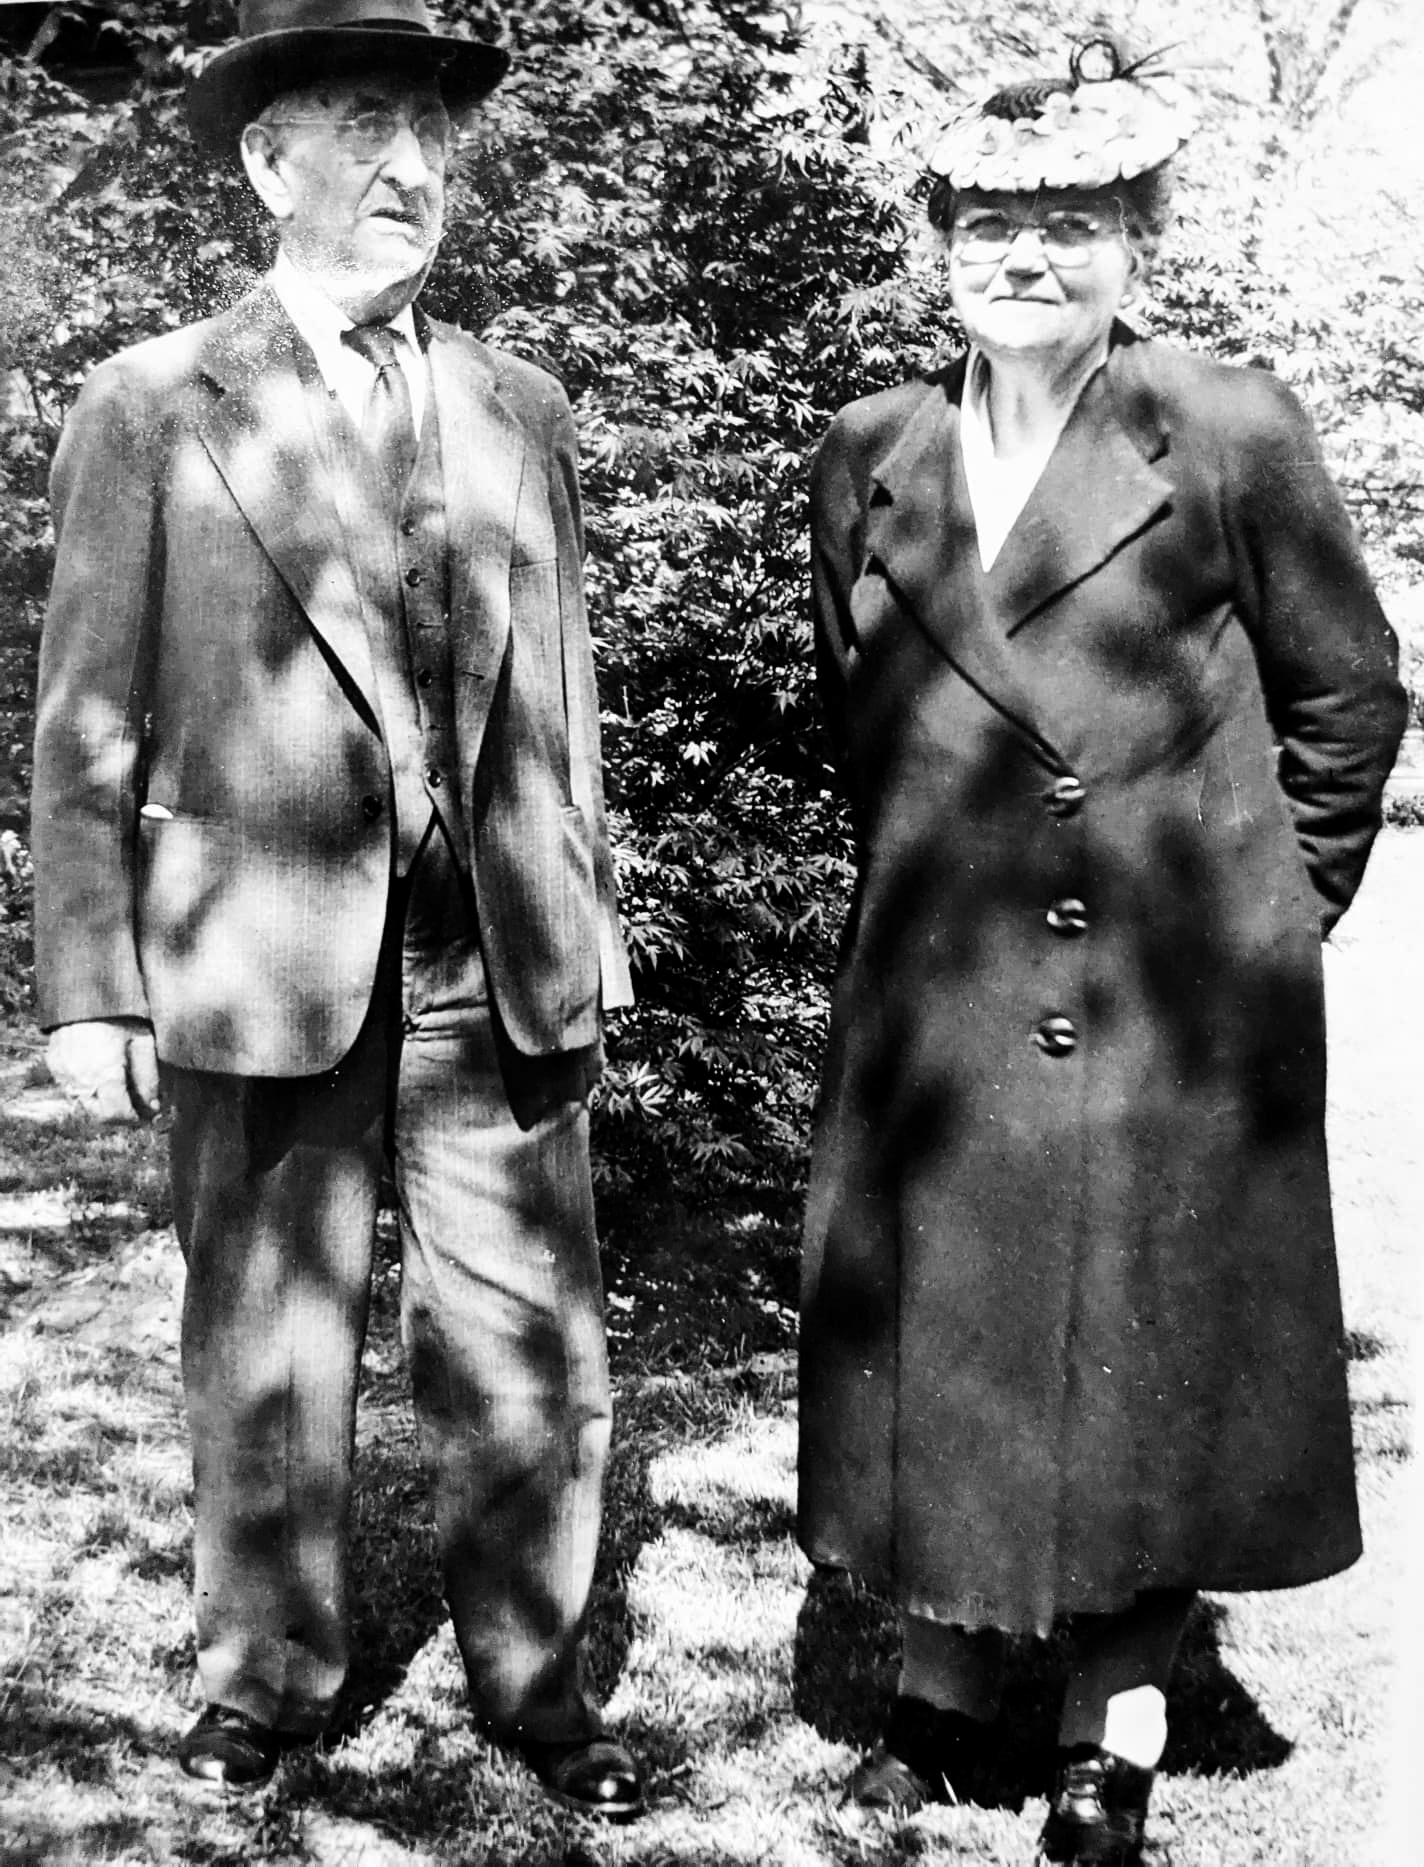 Anders and Anna sometime in the 1940s.